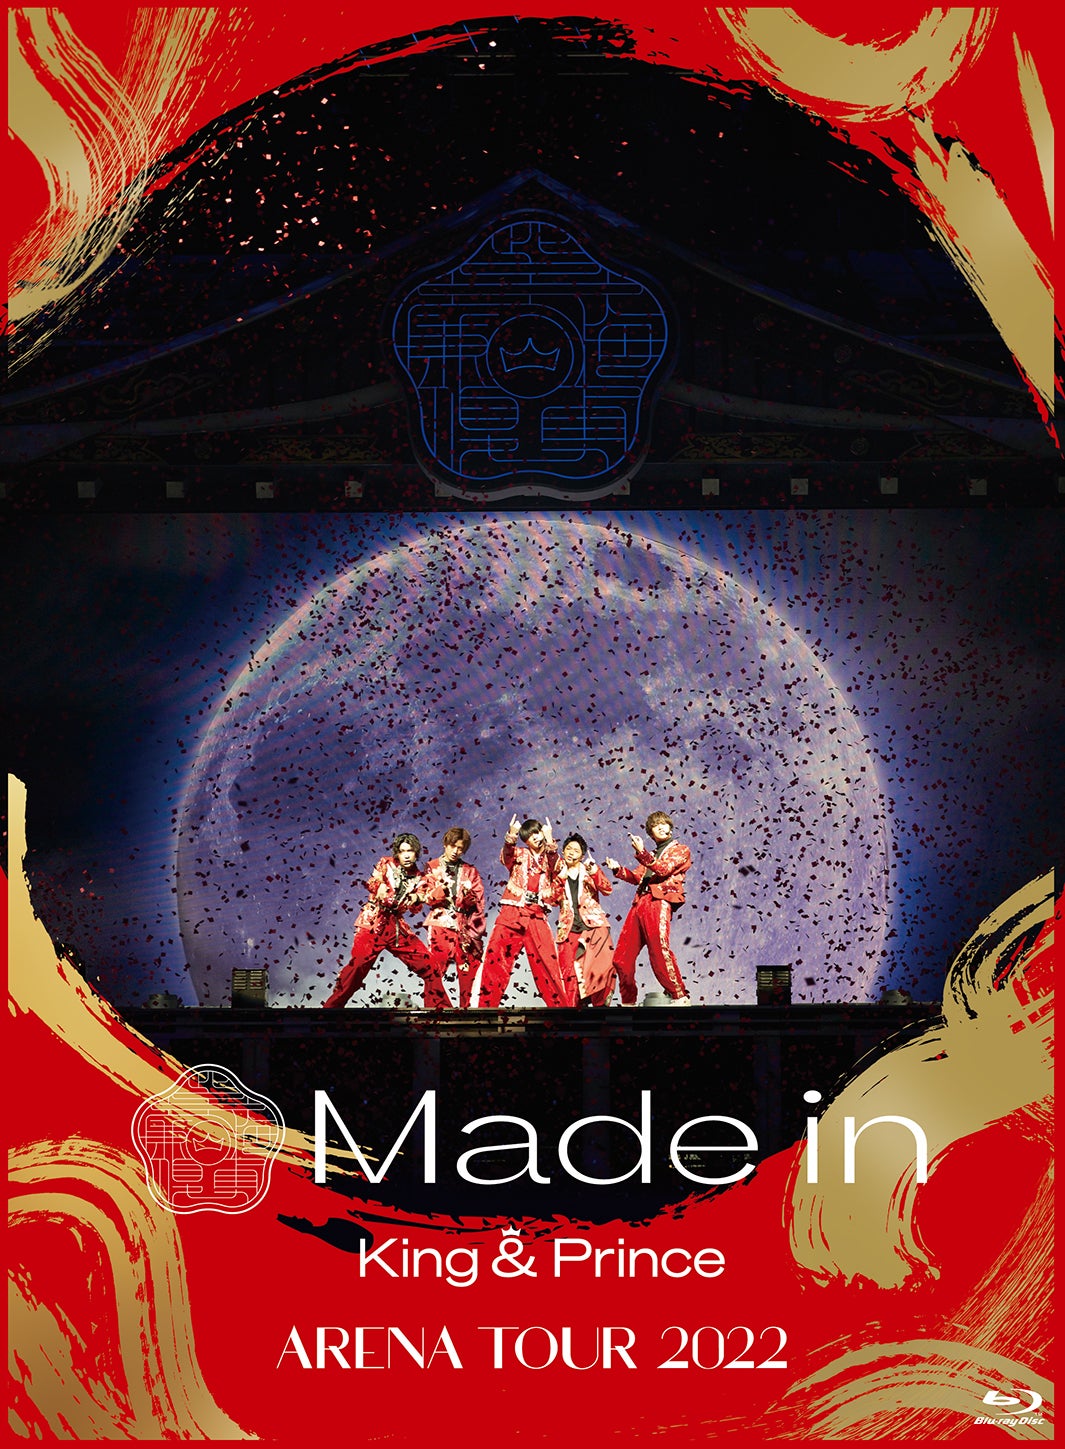 King ＆ Prince、アリーナツアー「Made in」Blu-ray ＆ DVD収録内容